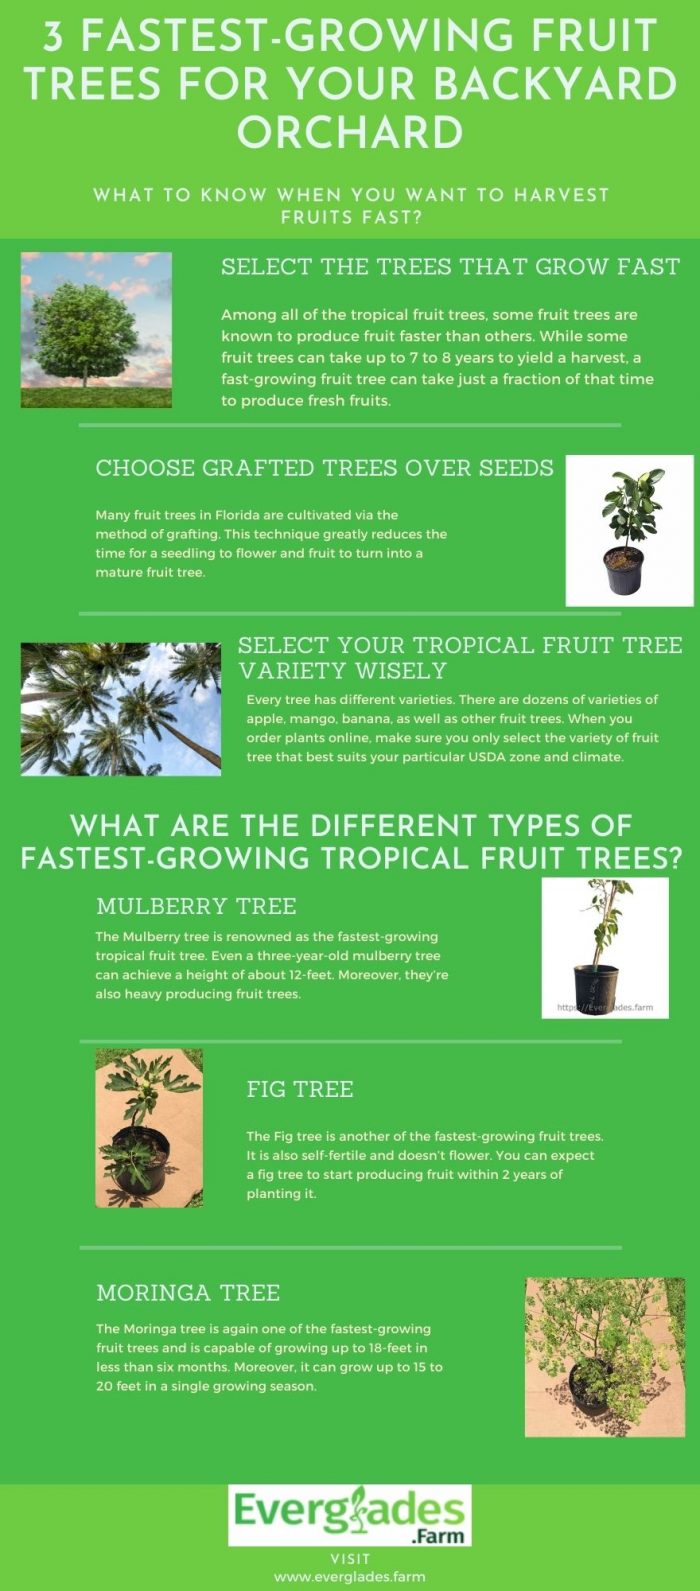 Fastest-Growing Fruit Trees for Your Backyard Orchard